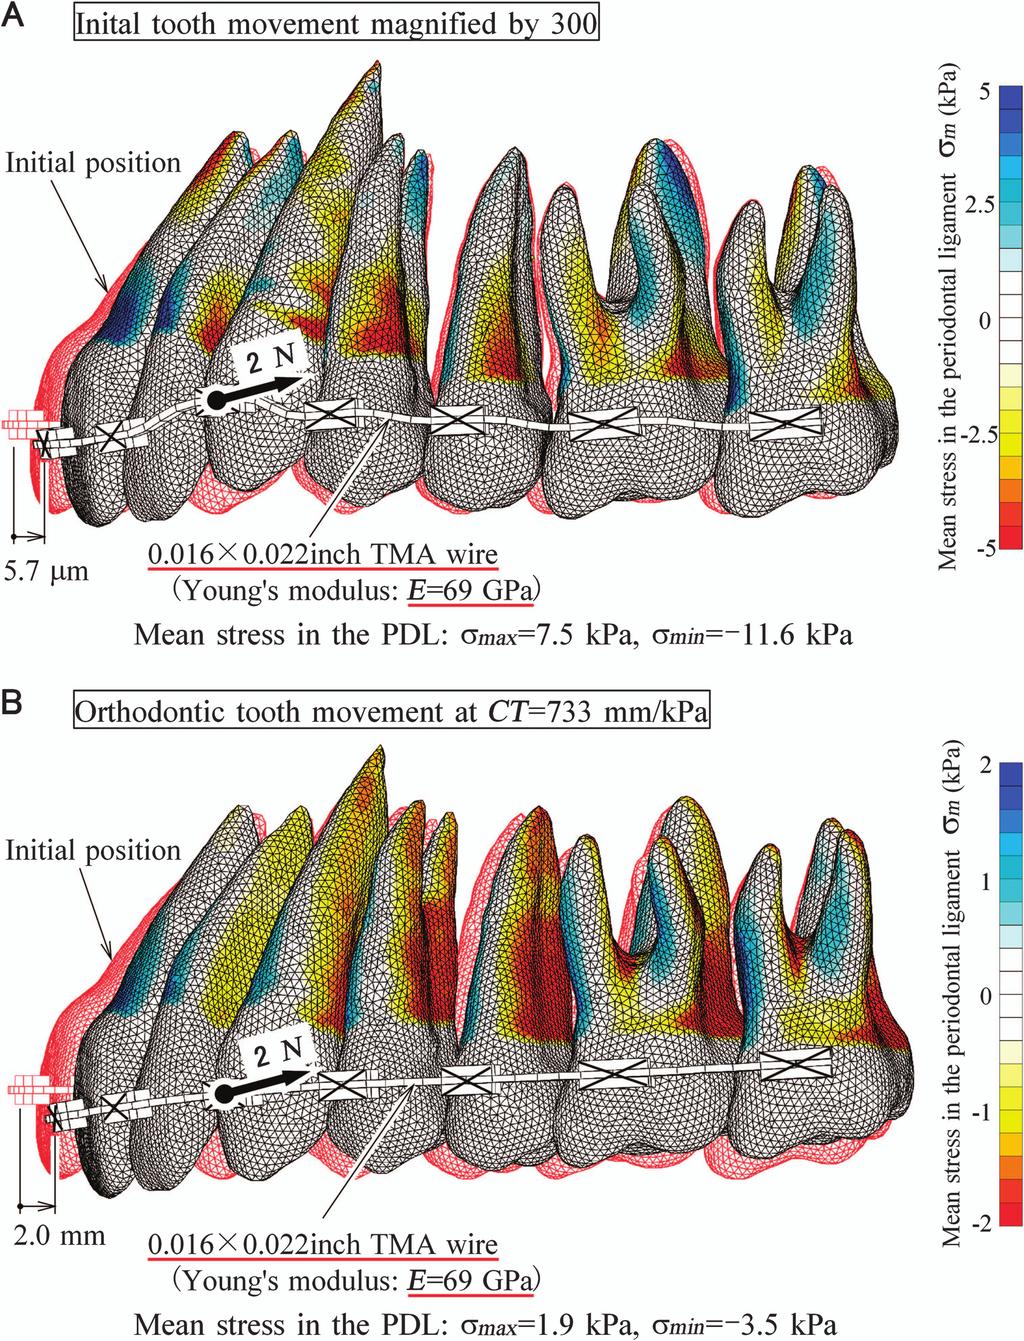 3 of 7 257 SIMULATIONOF OFORTHODONTIC ORTHODONTICTOOTH TOOTHMOVEMENT MOVEMENT SIMULATION a rigid power arm is bonded to the archwire.